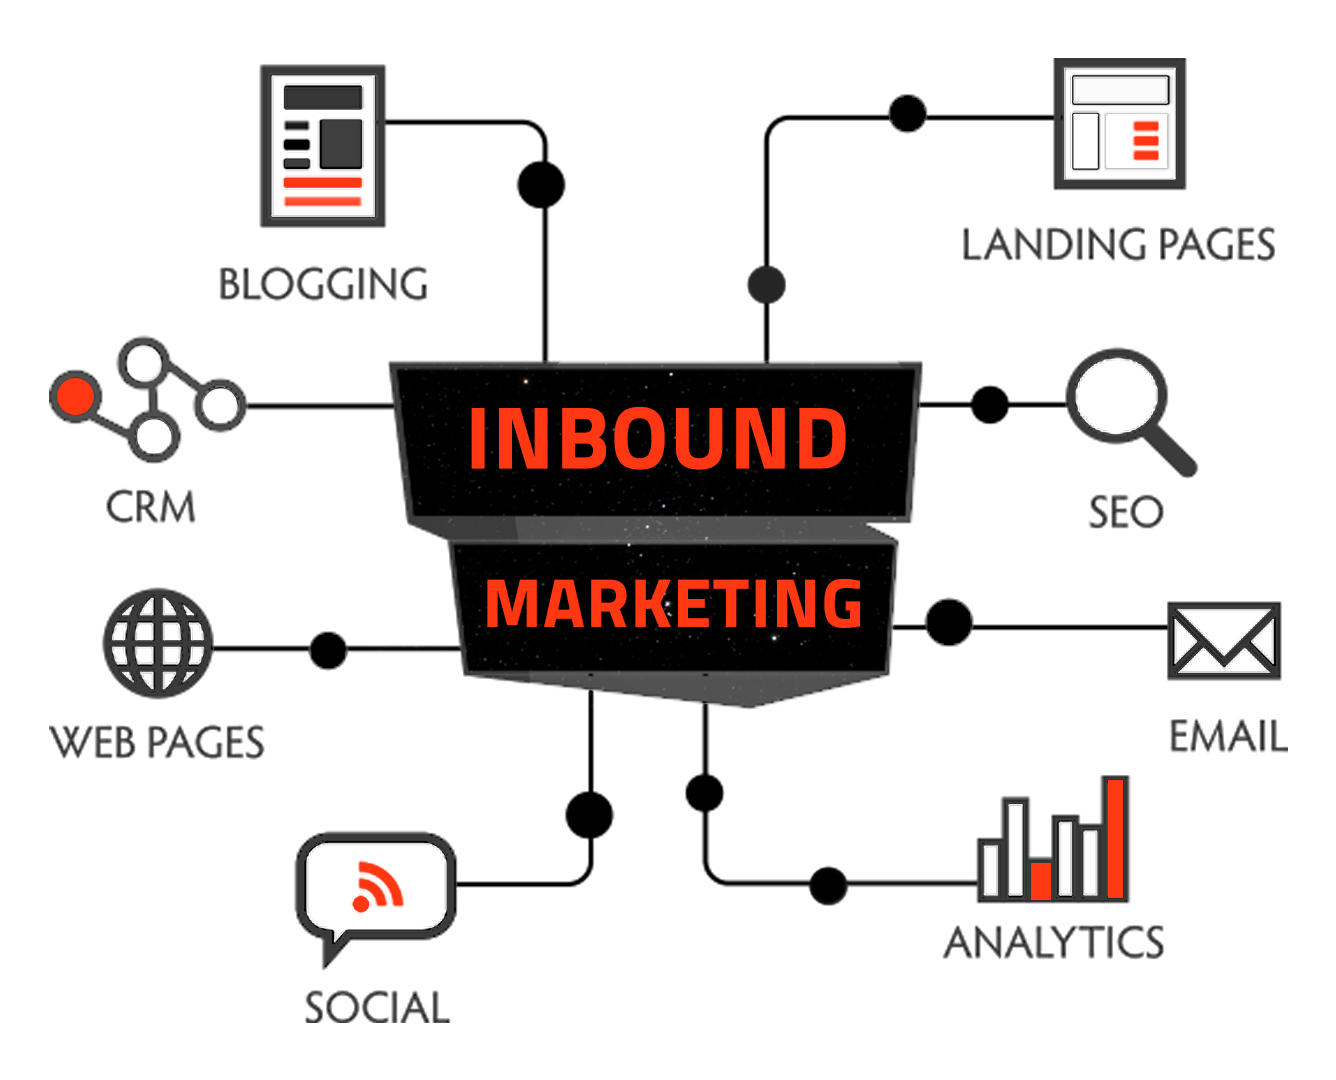 Applying the inbound marketing best practice through social media using blogging, landing pages, CRM, SEO, web pages, Email.